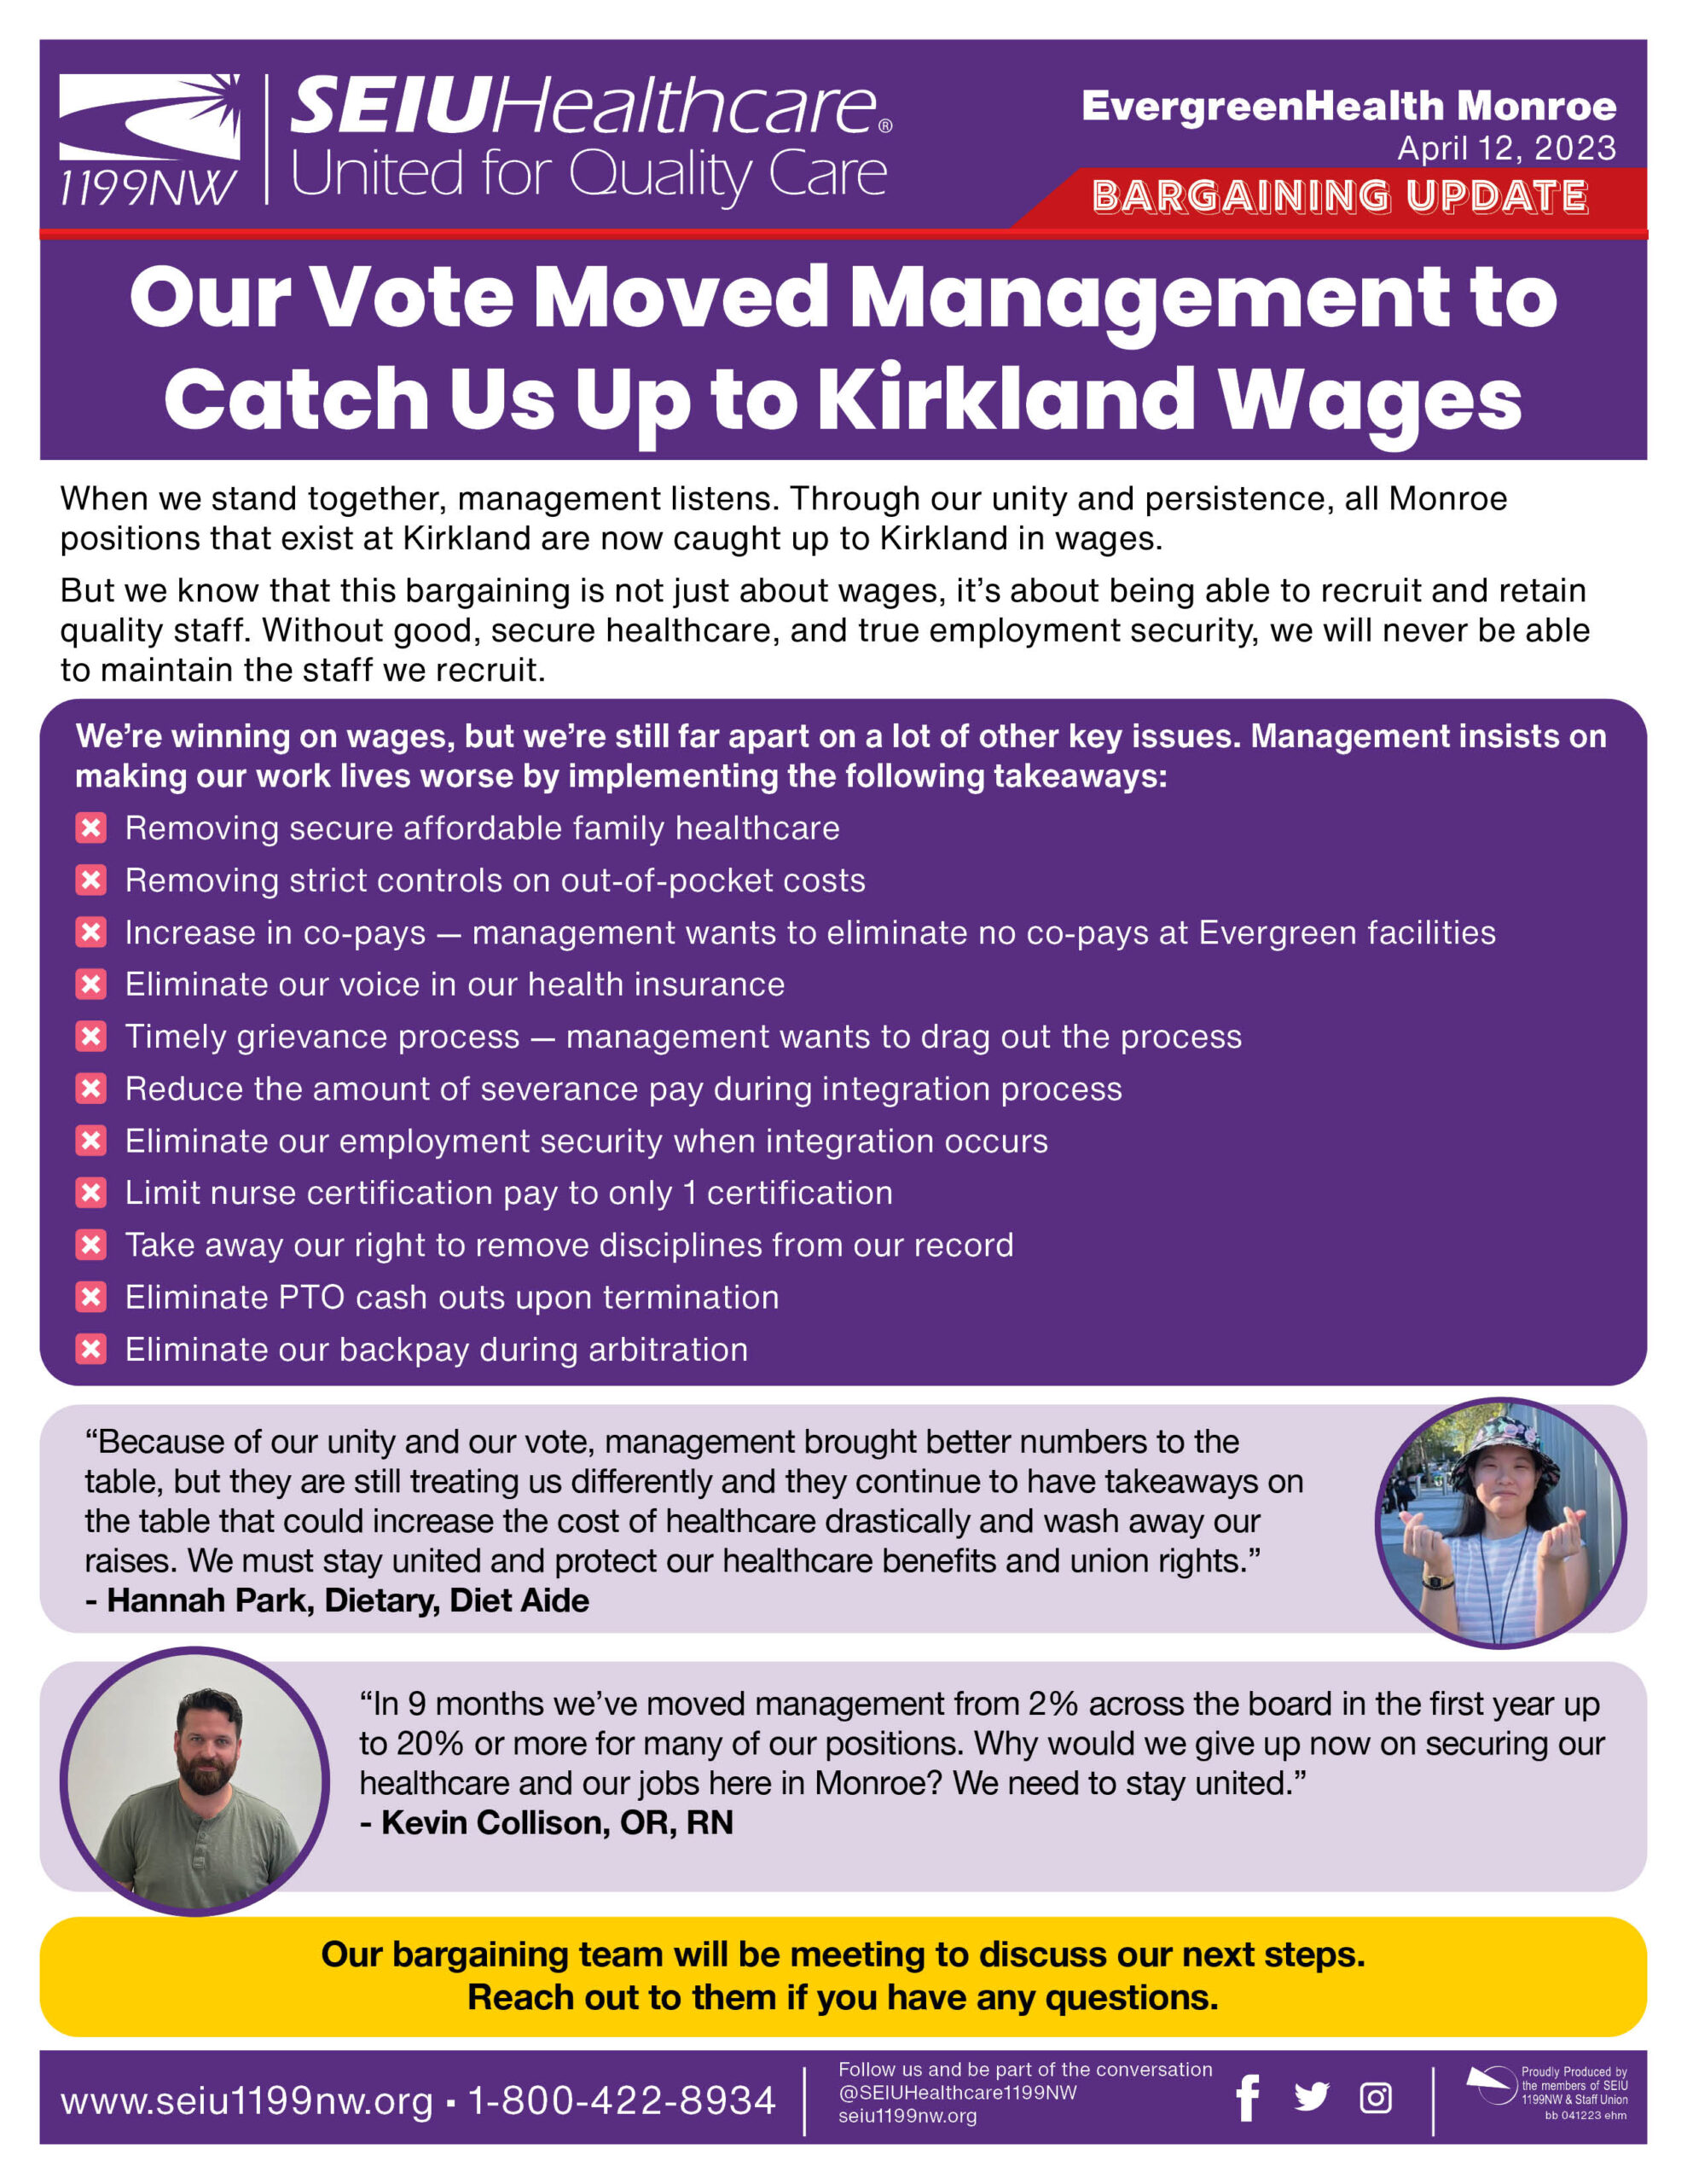 Our Vote Moved Management to Catch Us Up to Kirkland Wages